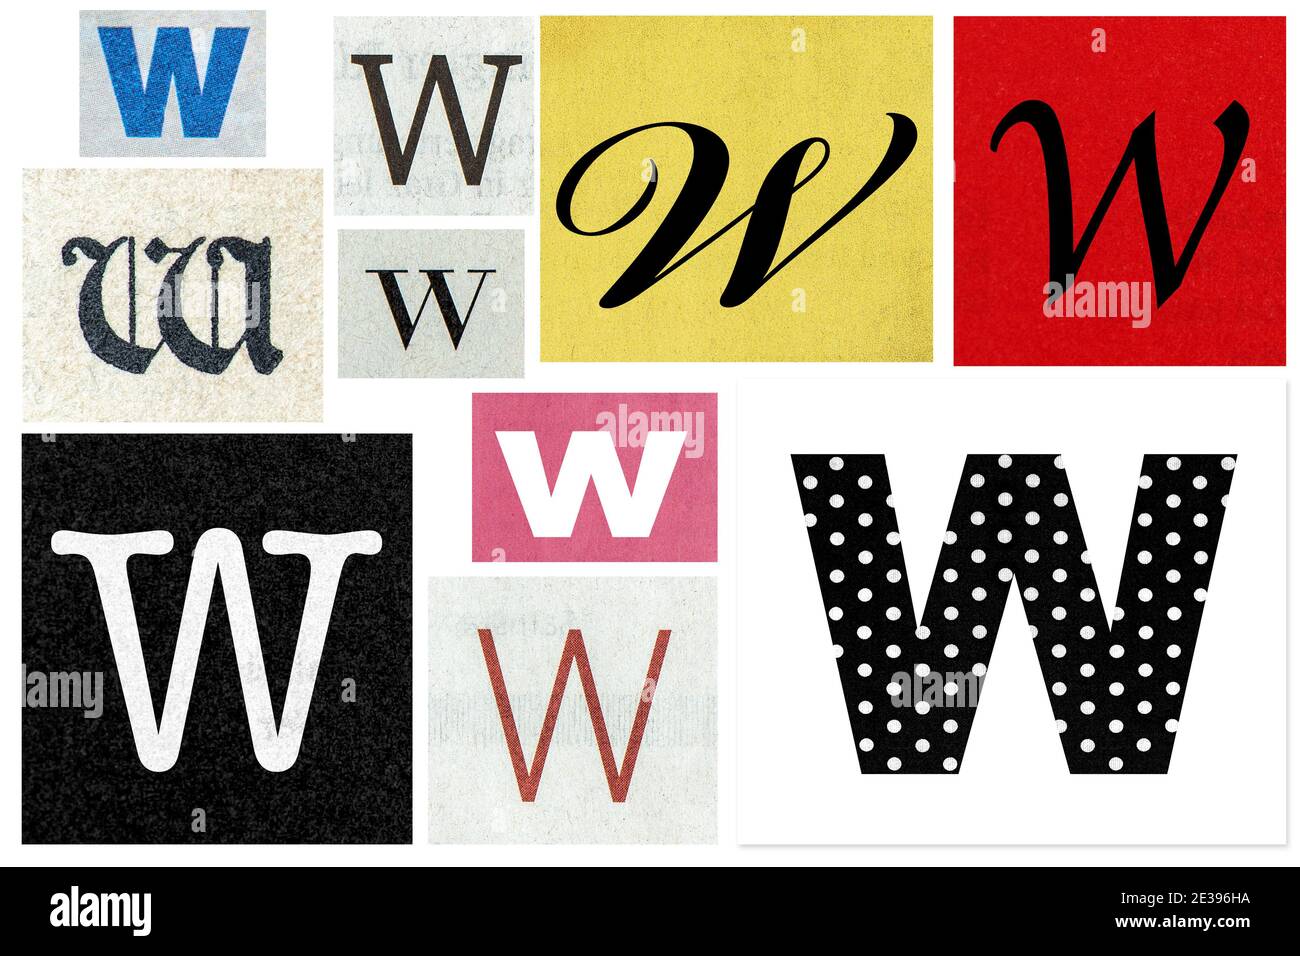 Paper Cut Letter W Old Newspaper Magazine Cutouts On White Background Stock Photo Alamy